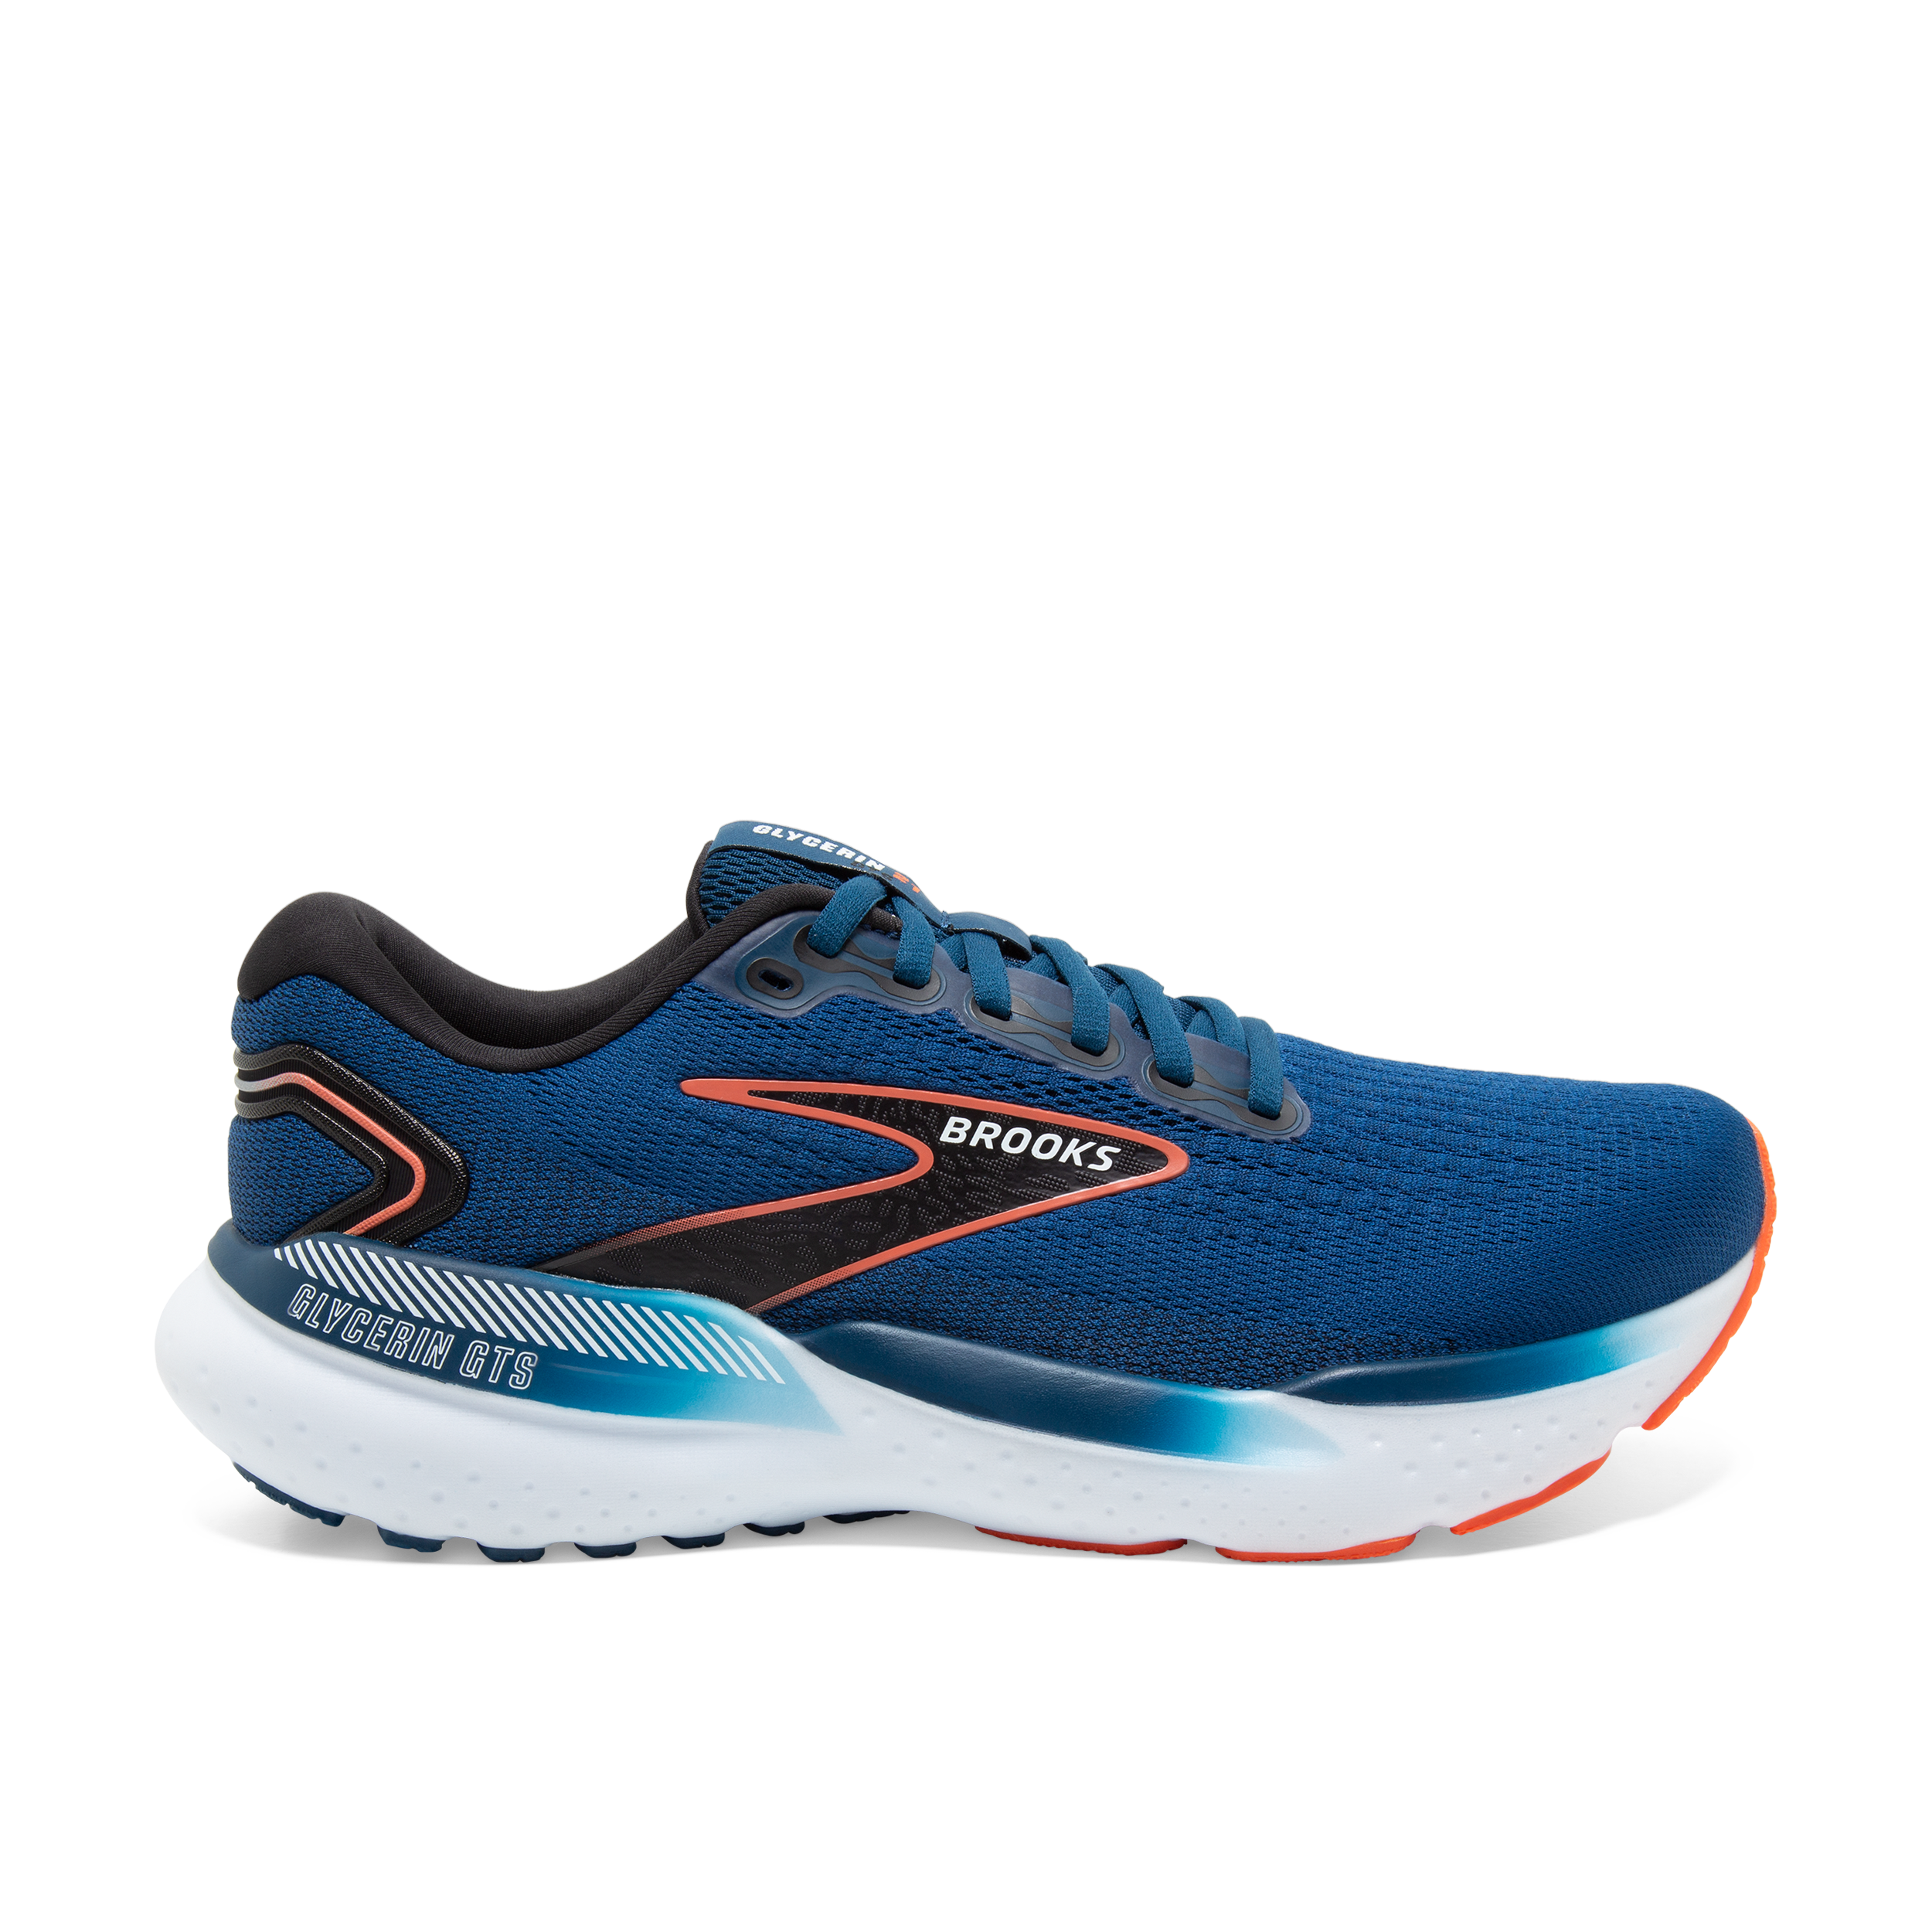 Brooks Glycerin 21 Review (includes Glycerin GTS 21) -   Blog